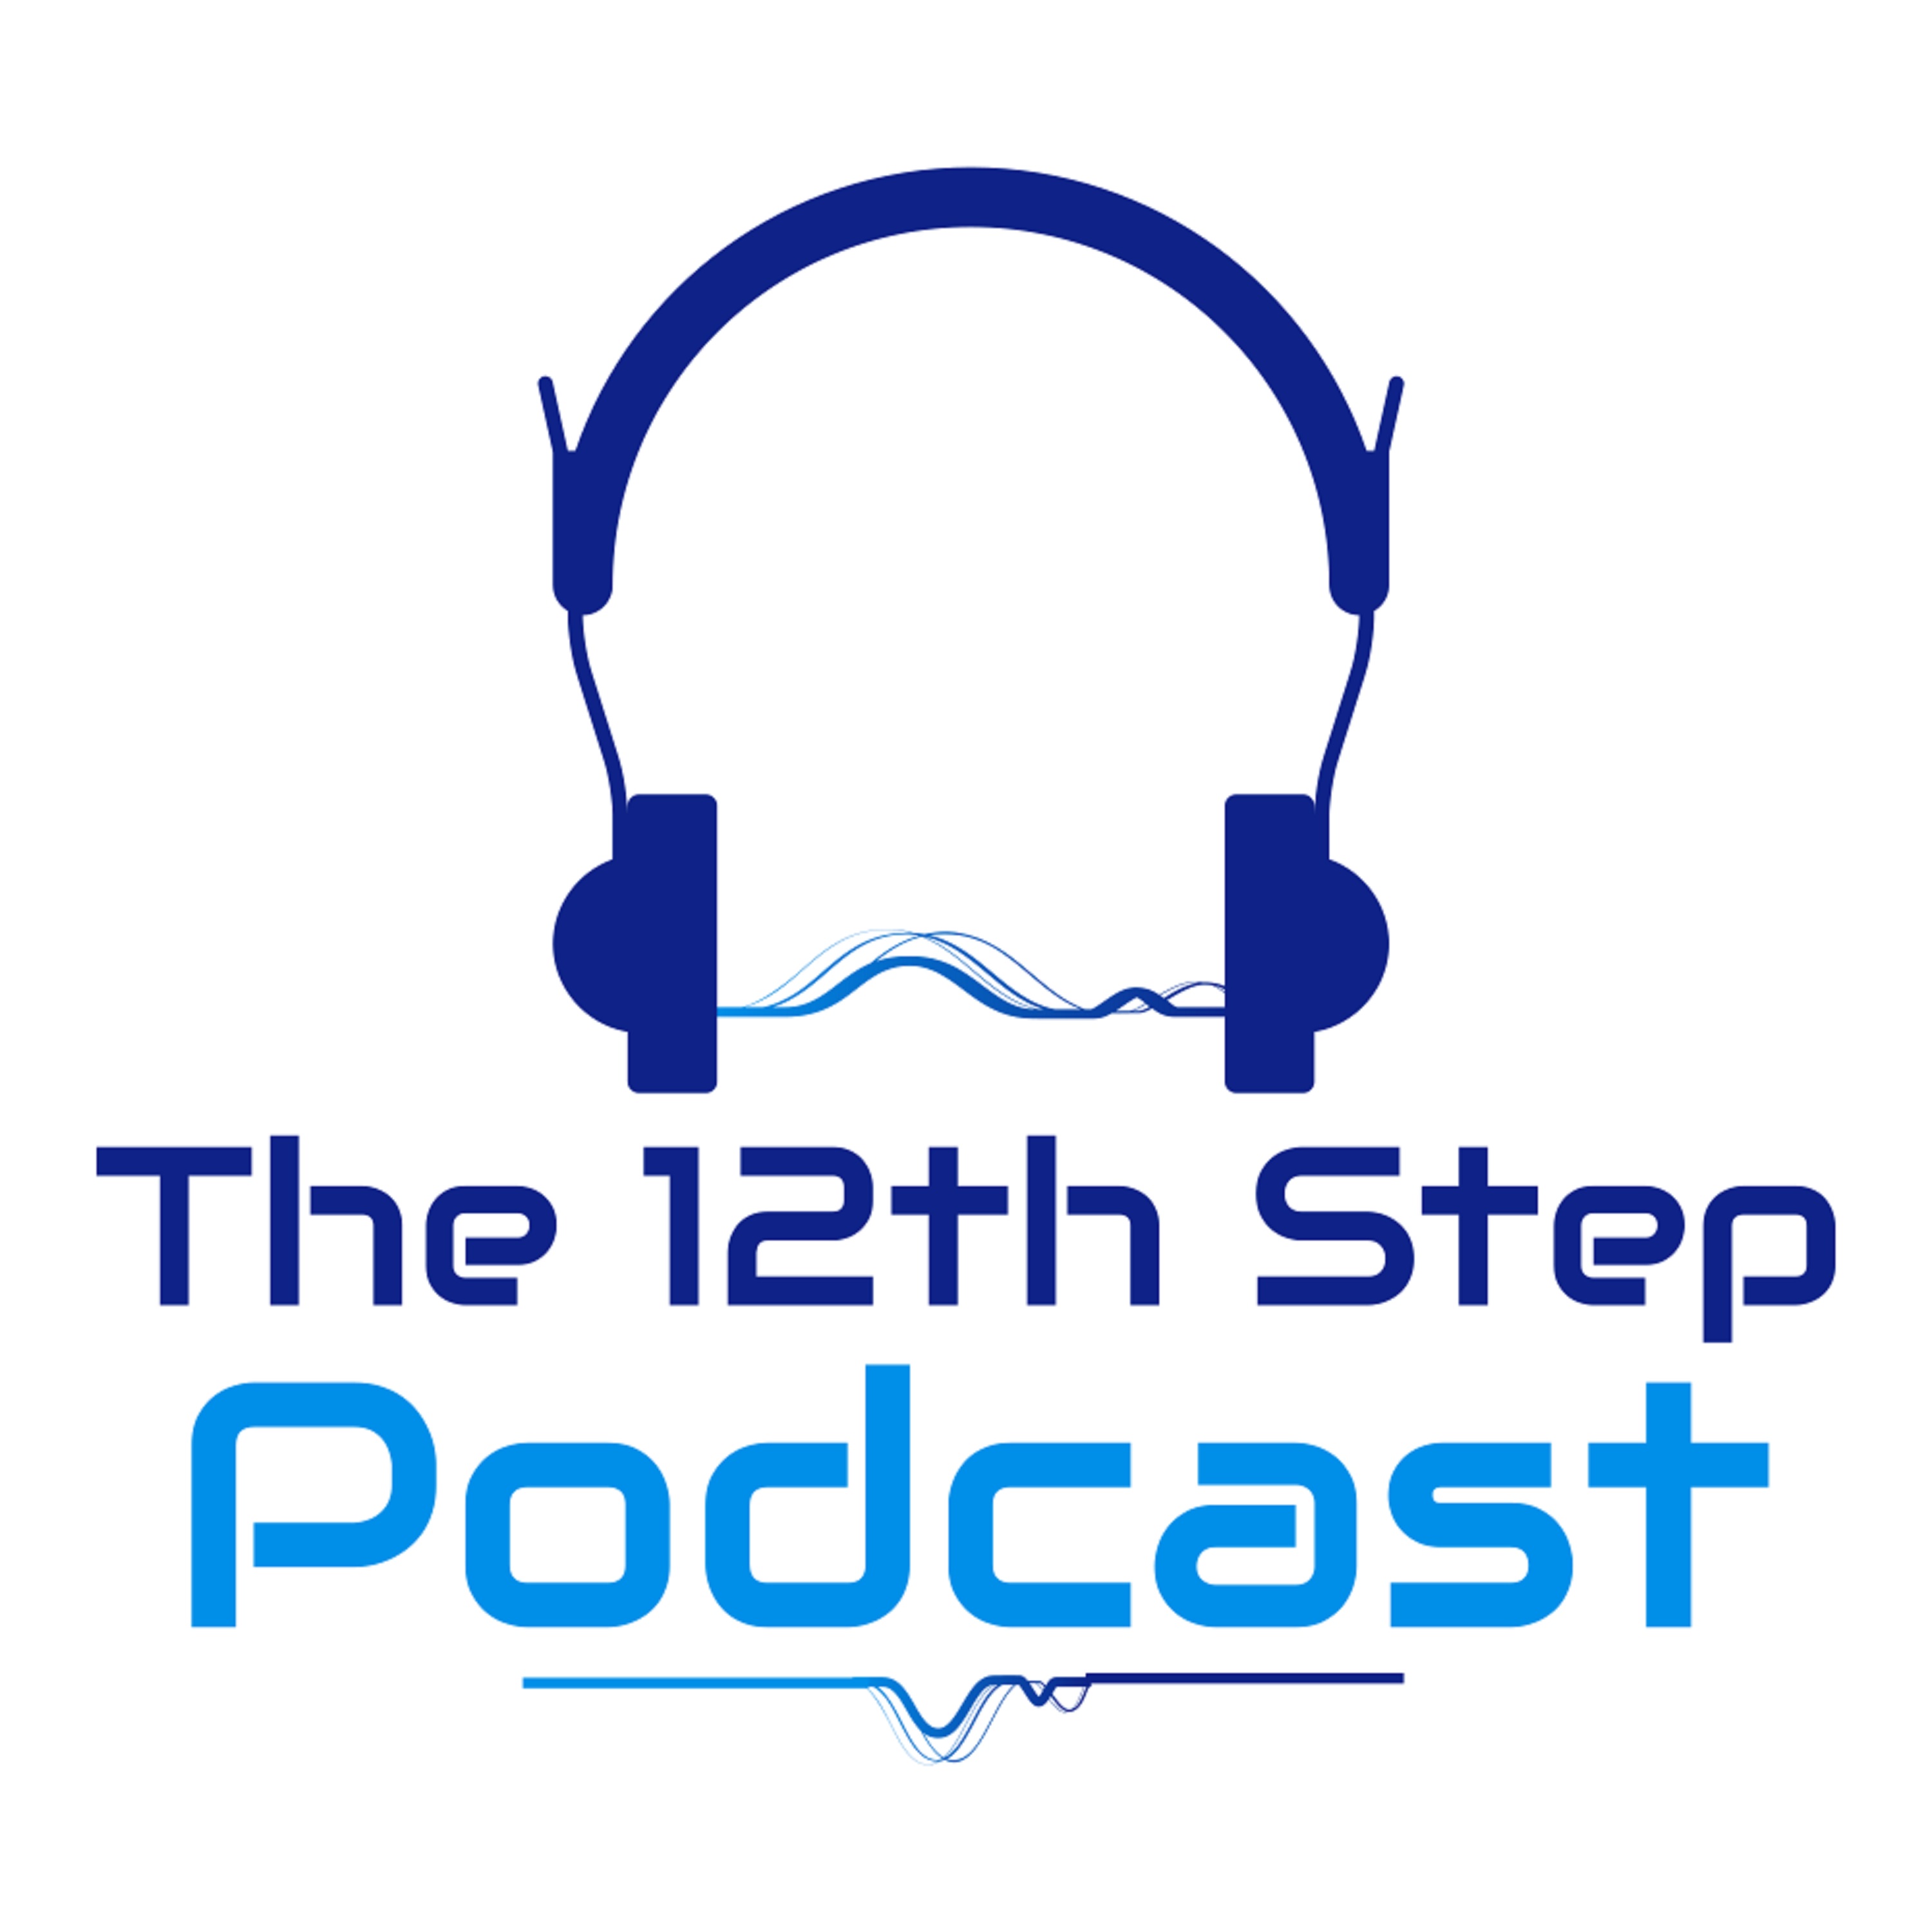 The 12th Step Podcast